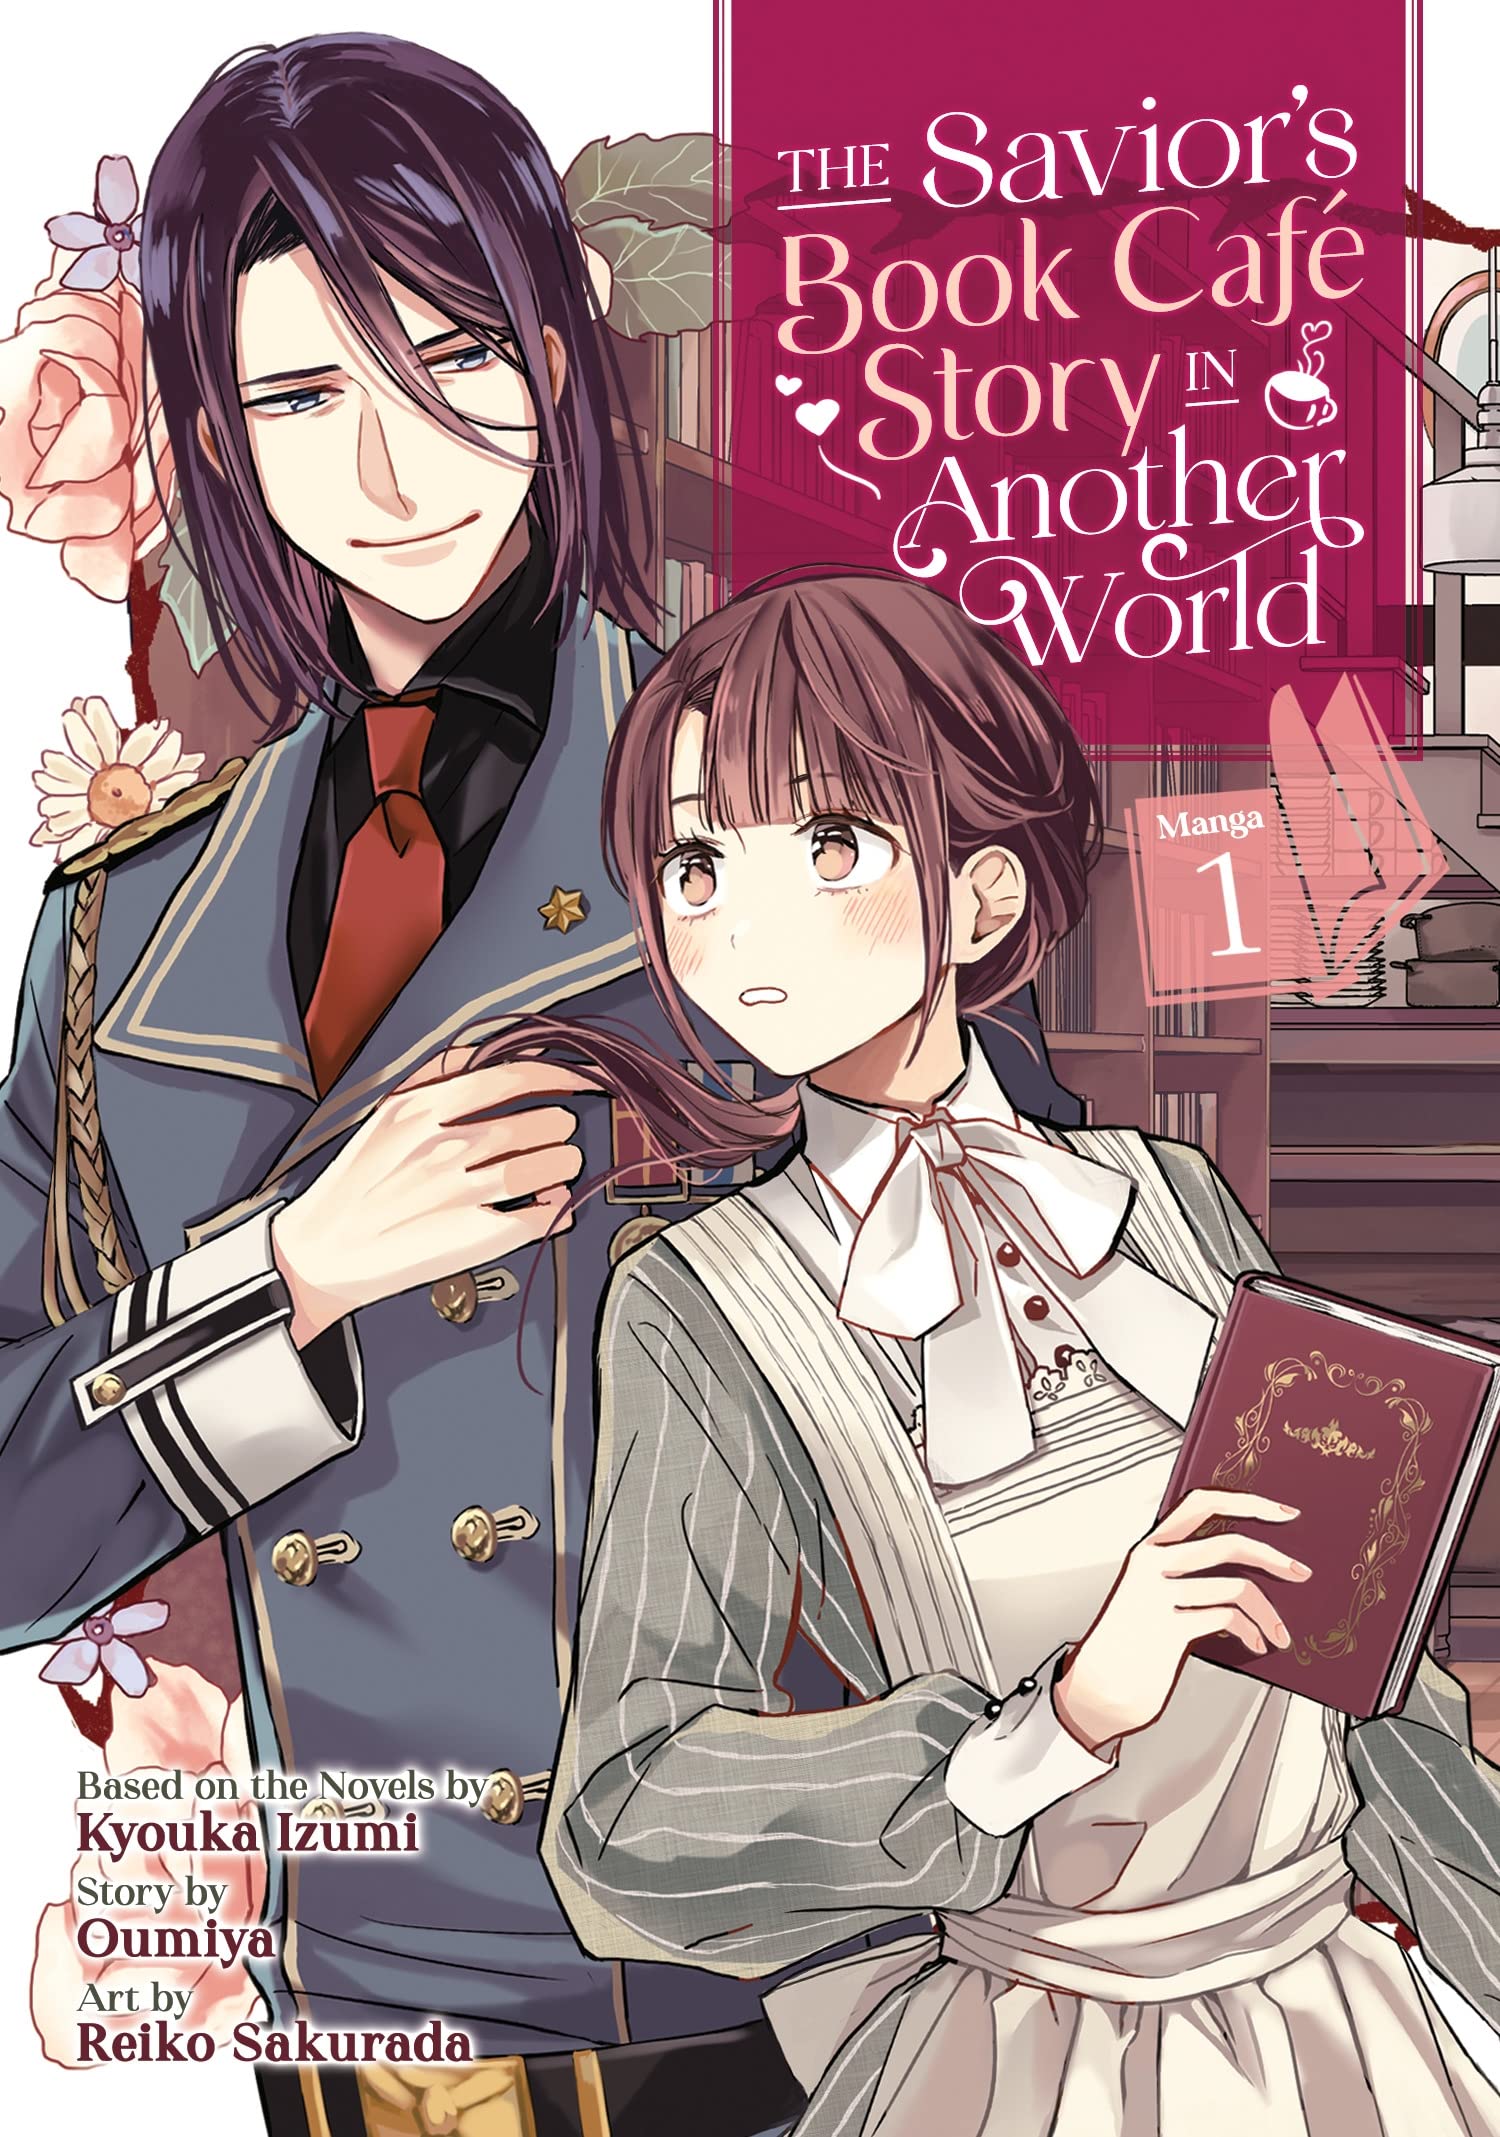 The Savior's Book Cafe Story in Another World (Manga) Vol. 01